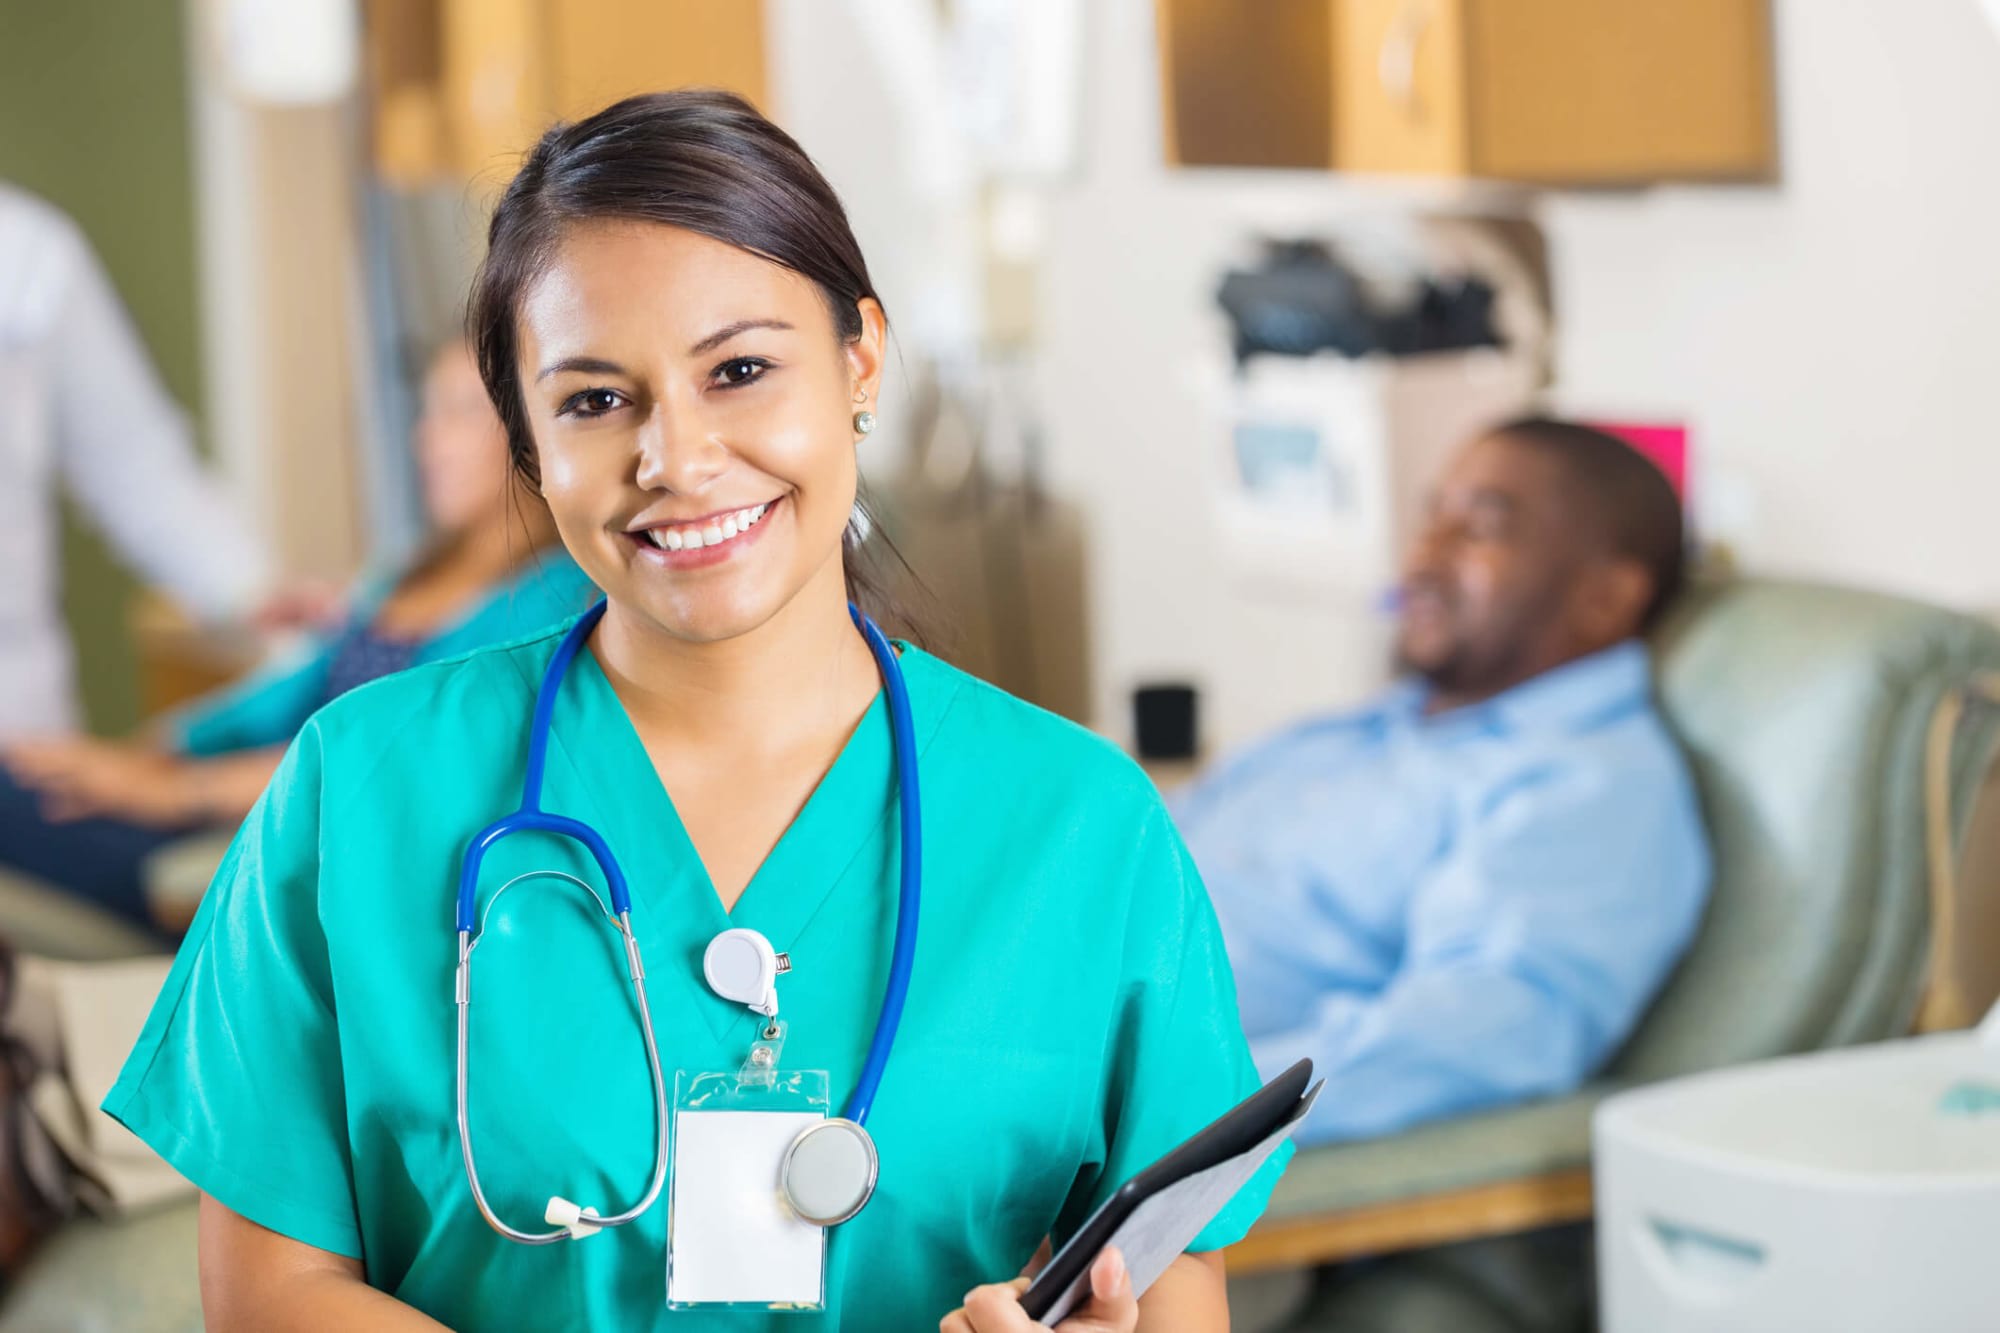 Hispanic and Latino/a Nurses You Should Know About